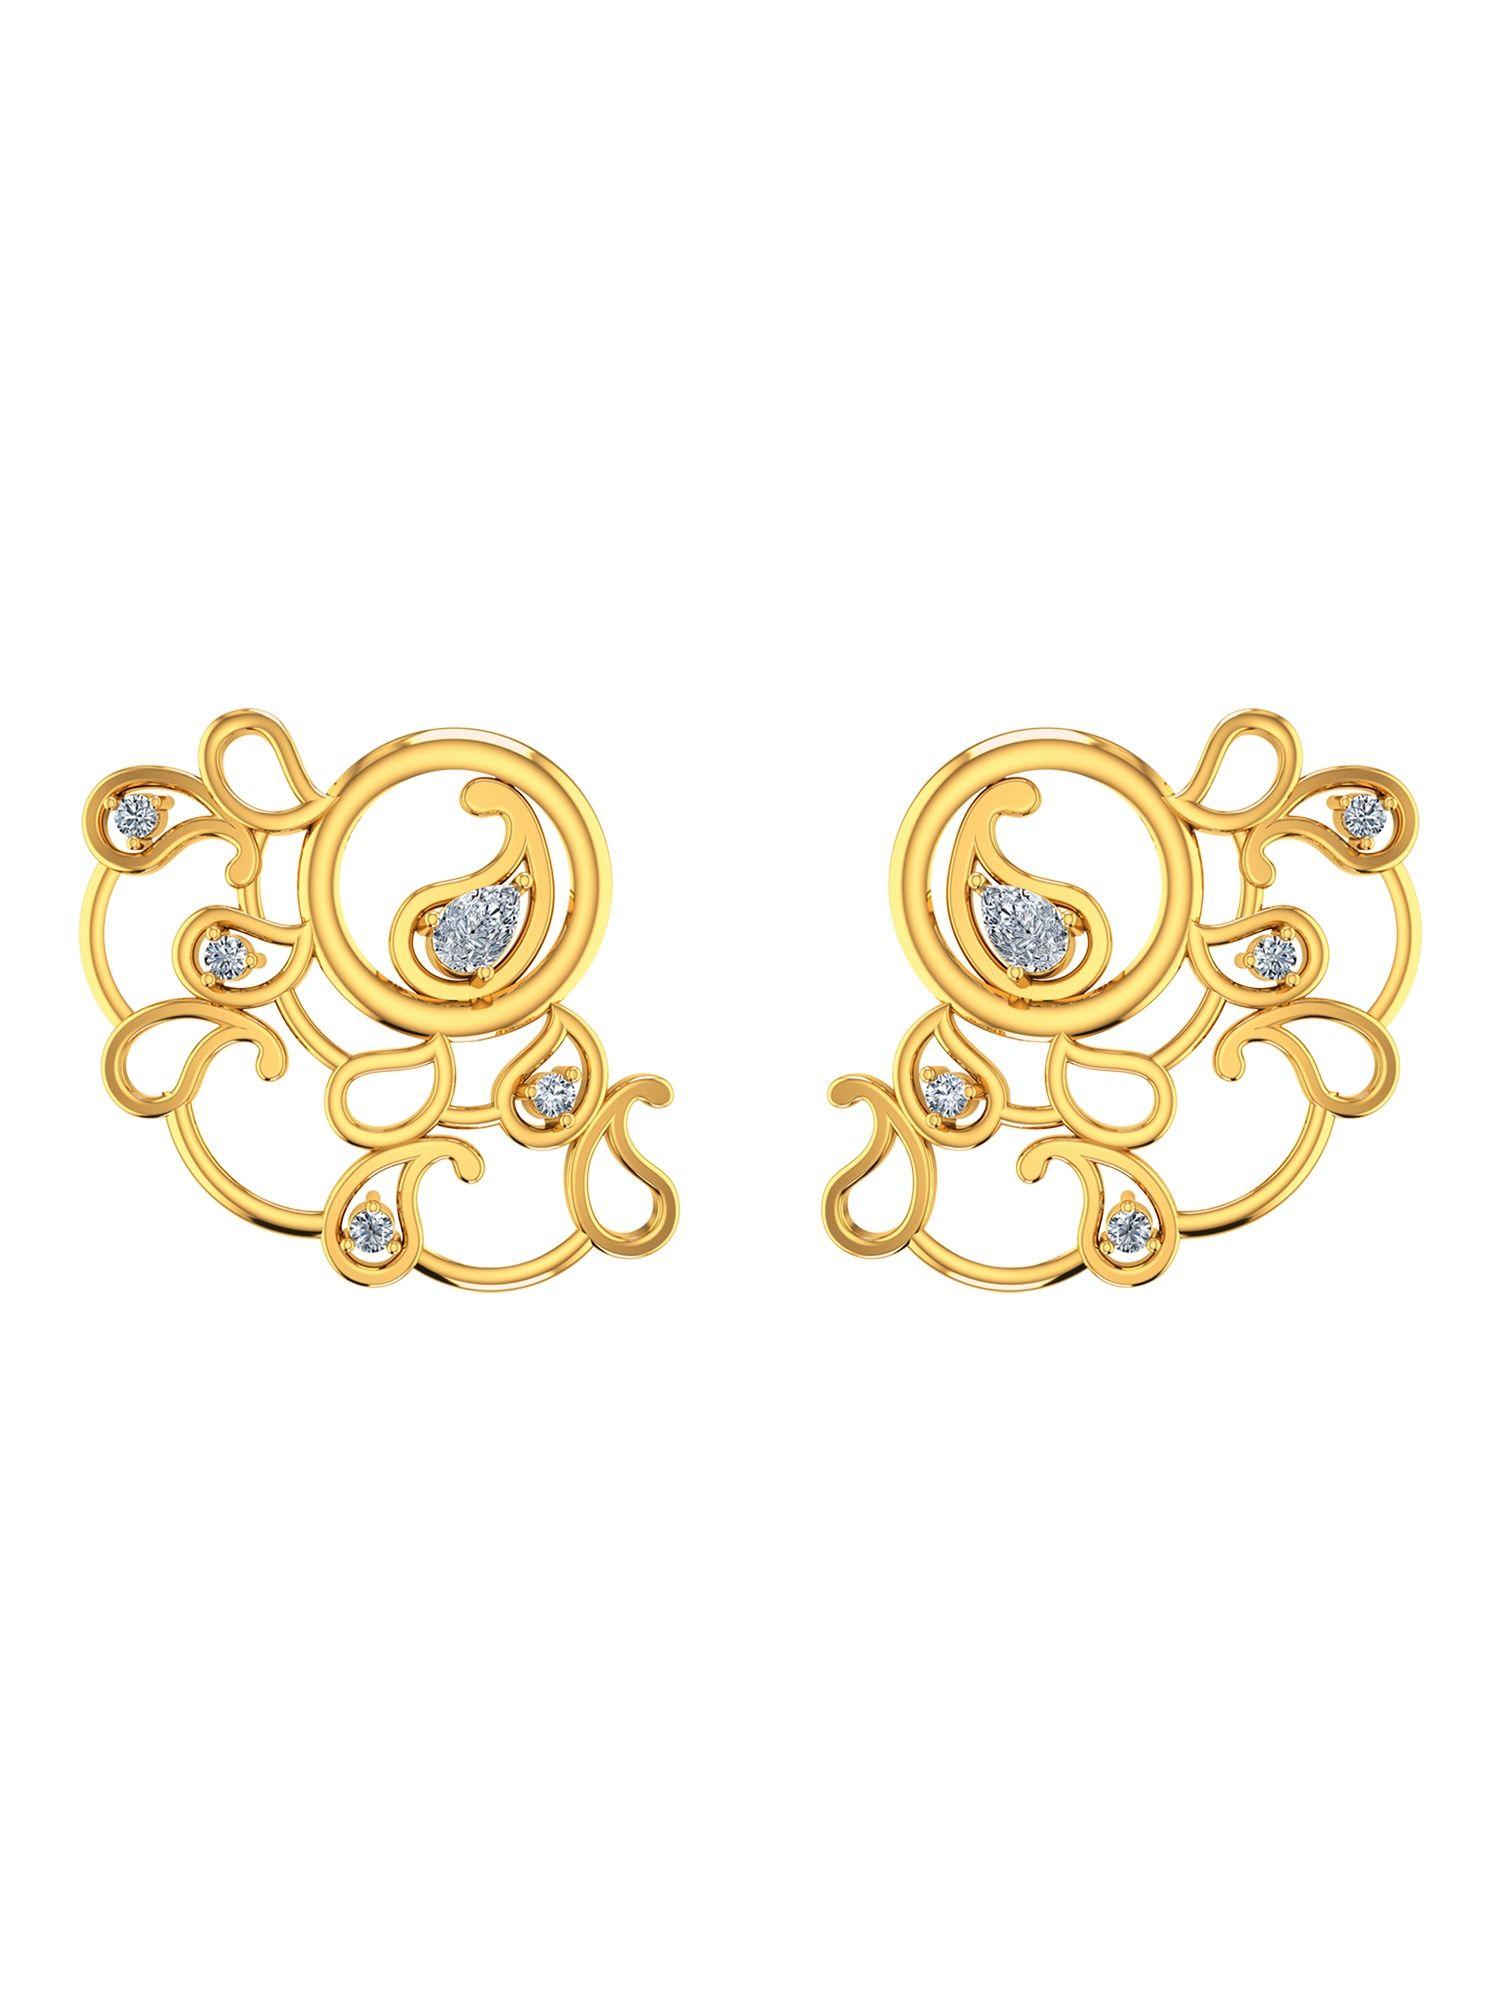 boteh stud gold earrings with gold screw